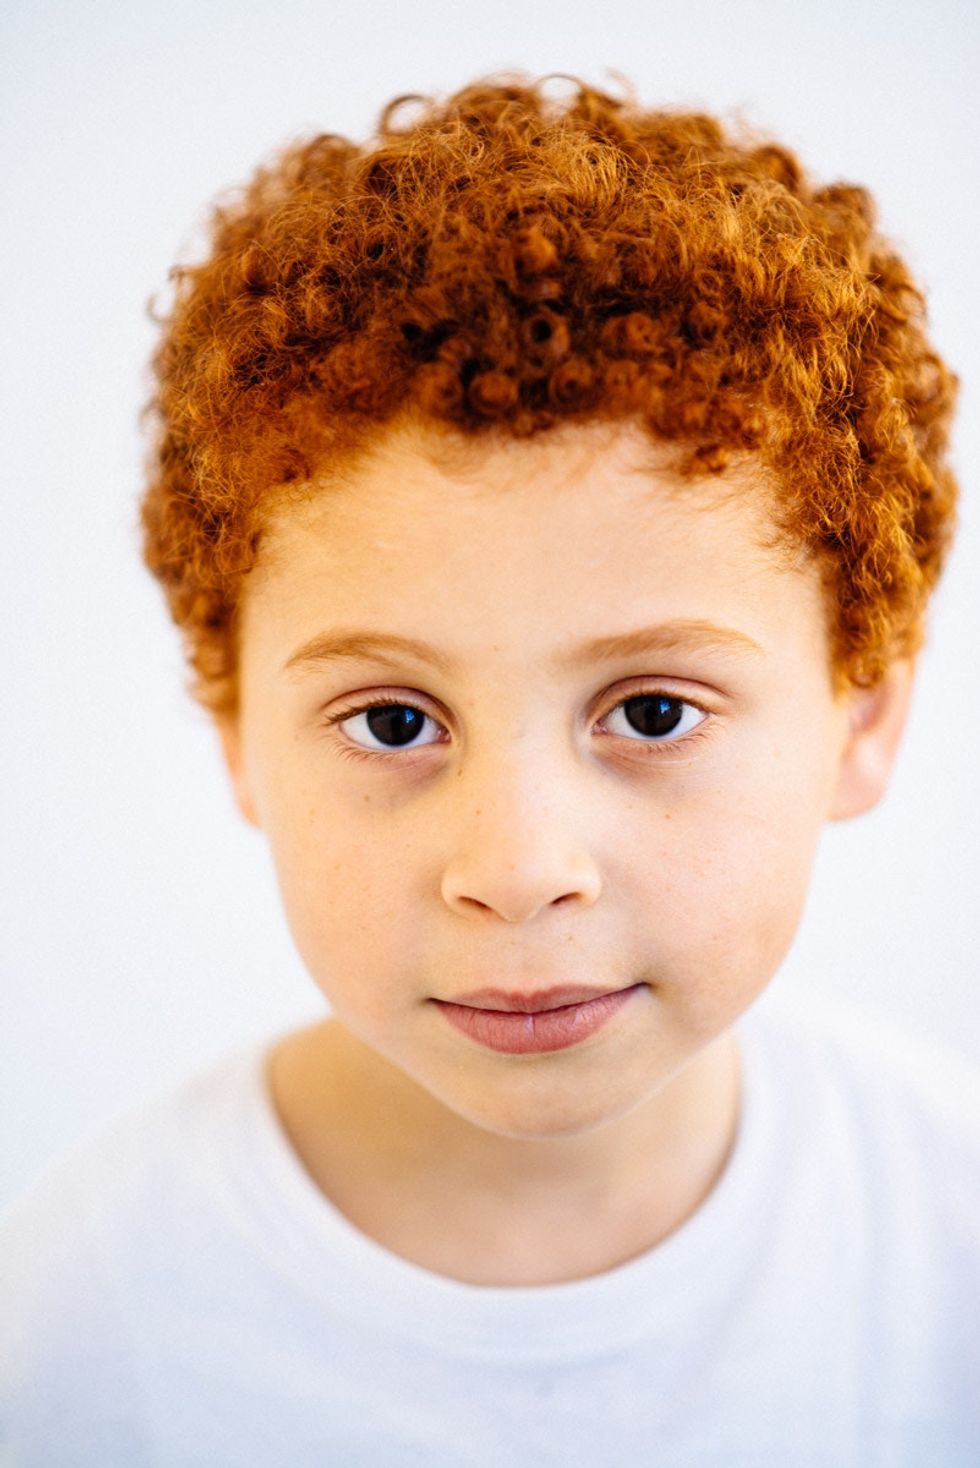 7 Gorgeous Photos Of Redheads That Challenge The Way We See Race Upworthy